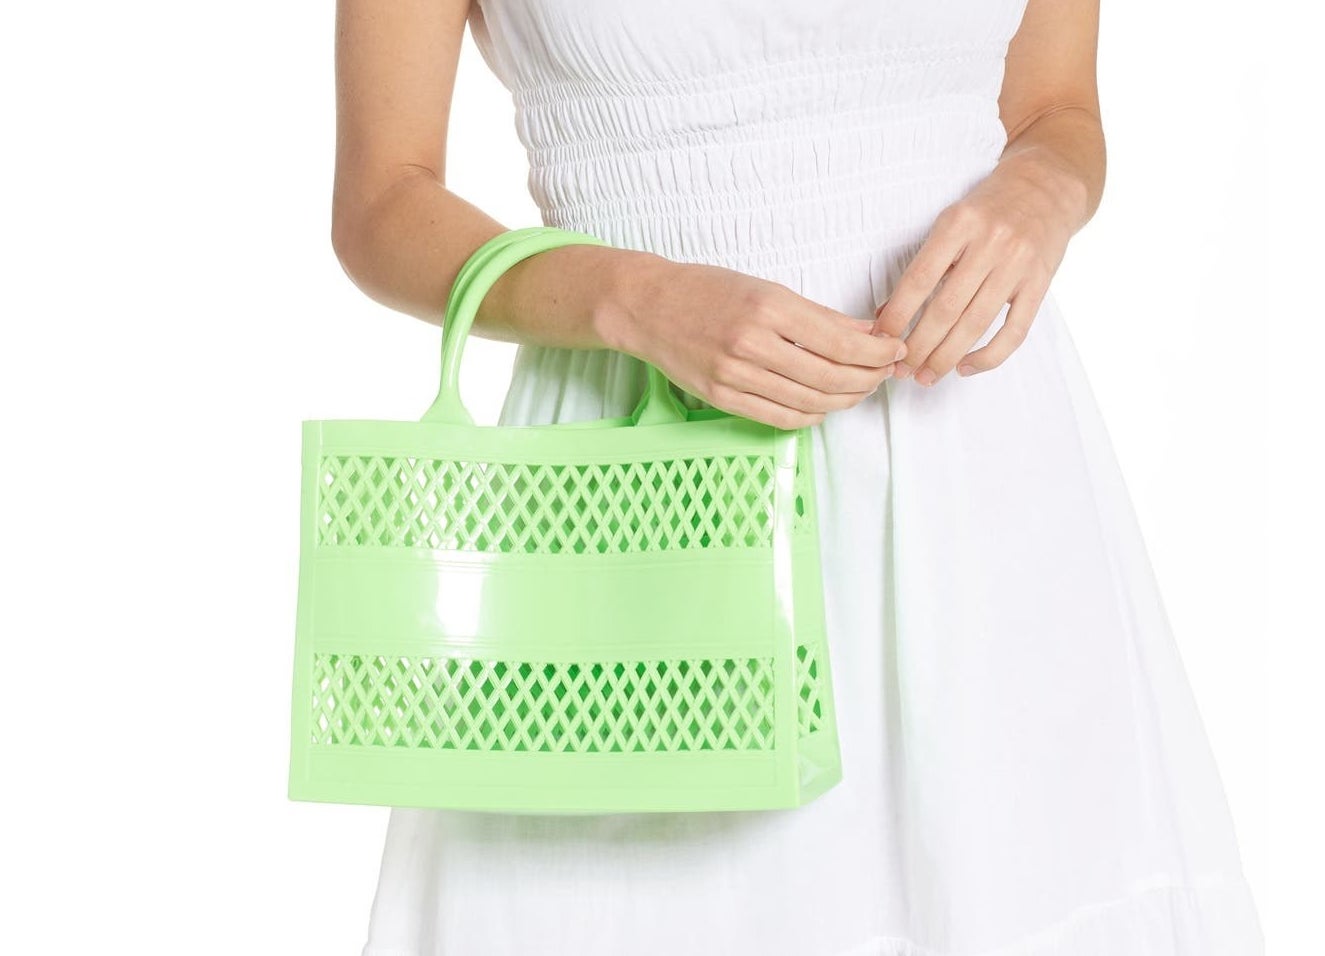 A woman holding the plastic tote with mesh sides